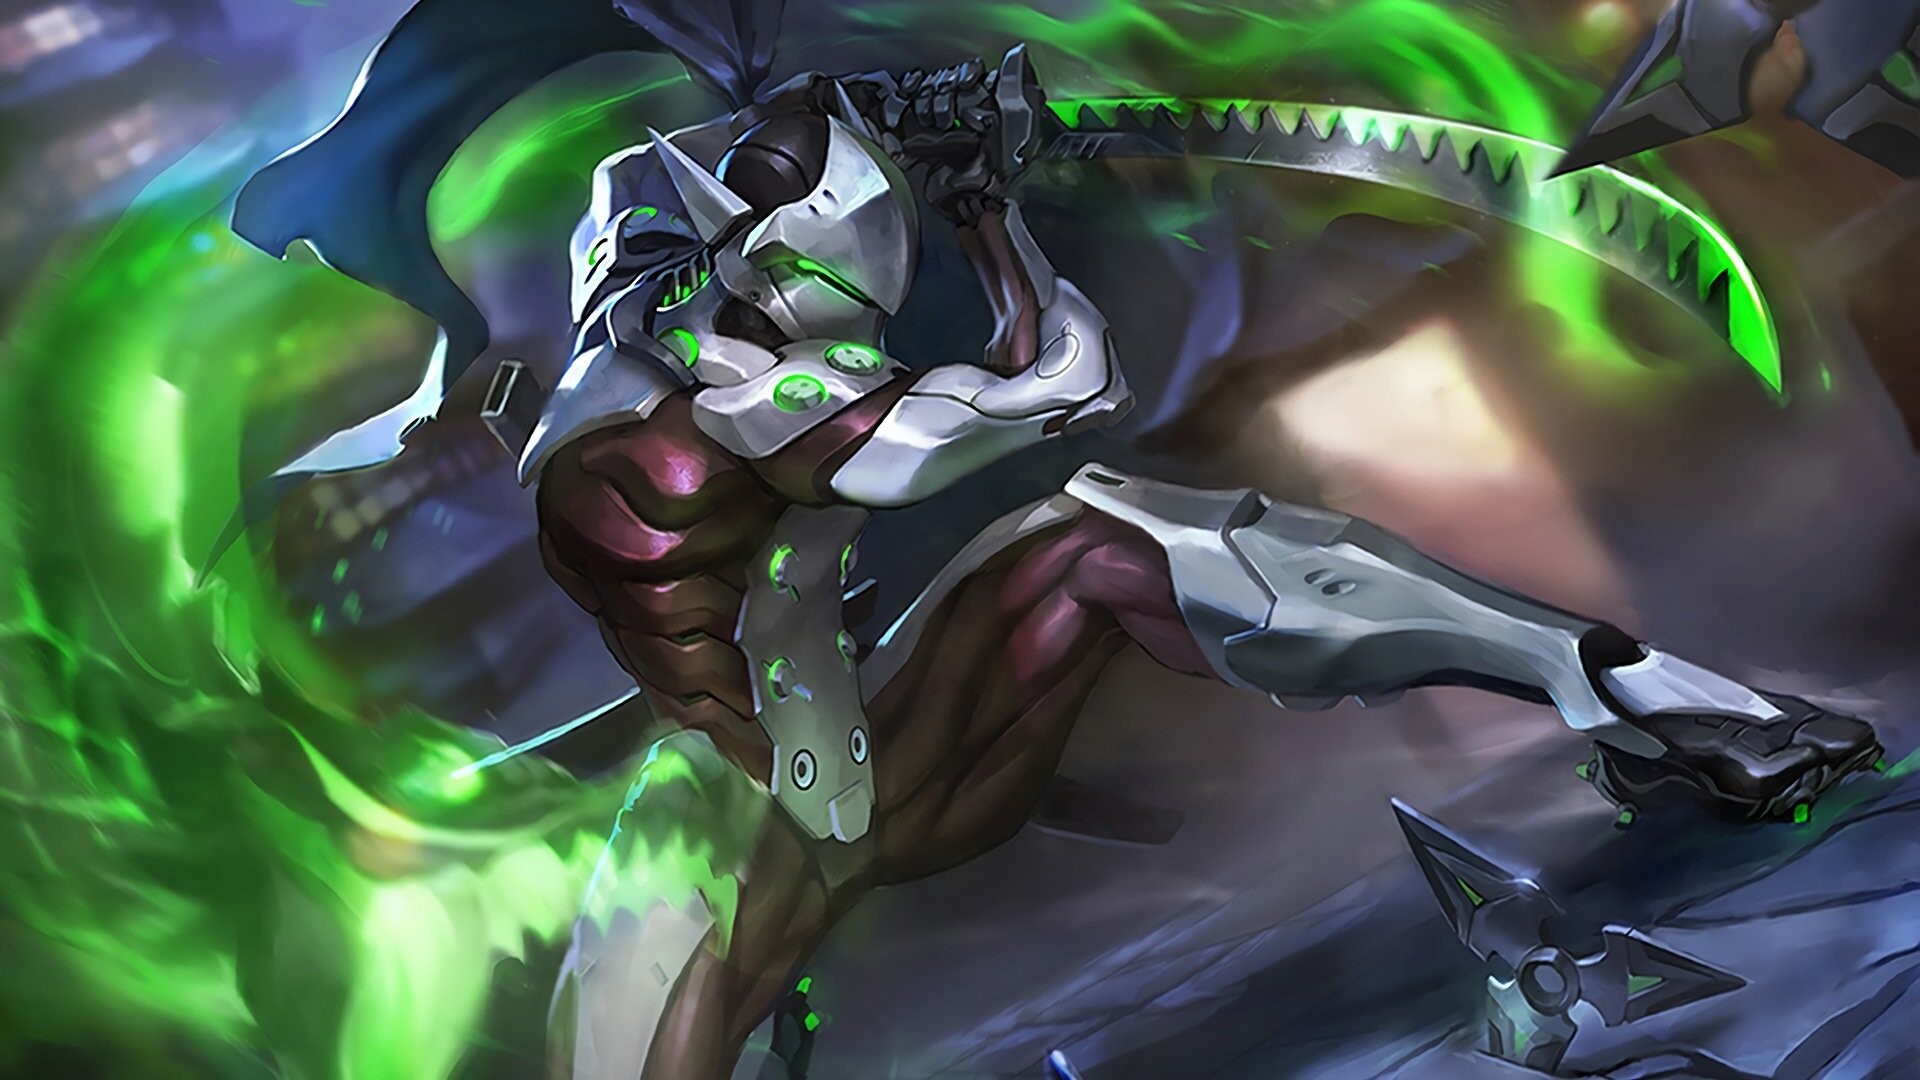 Genji: The cyborg that made peace with the augmented body he once rejected. 1920x1080 Full HD Background.